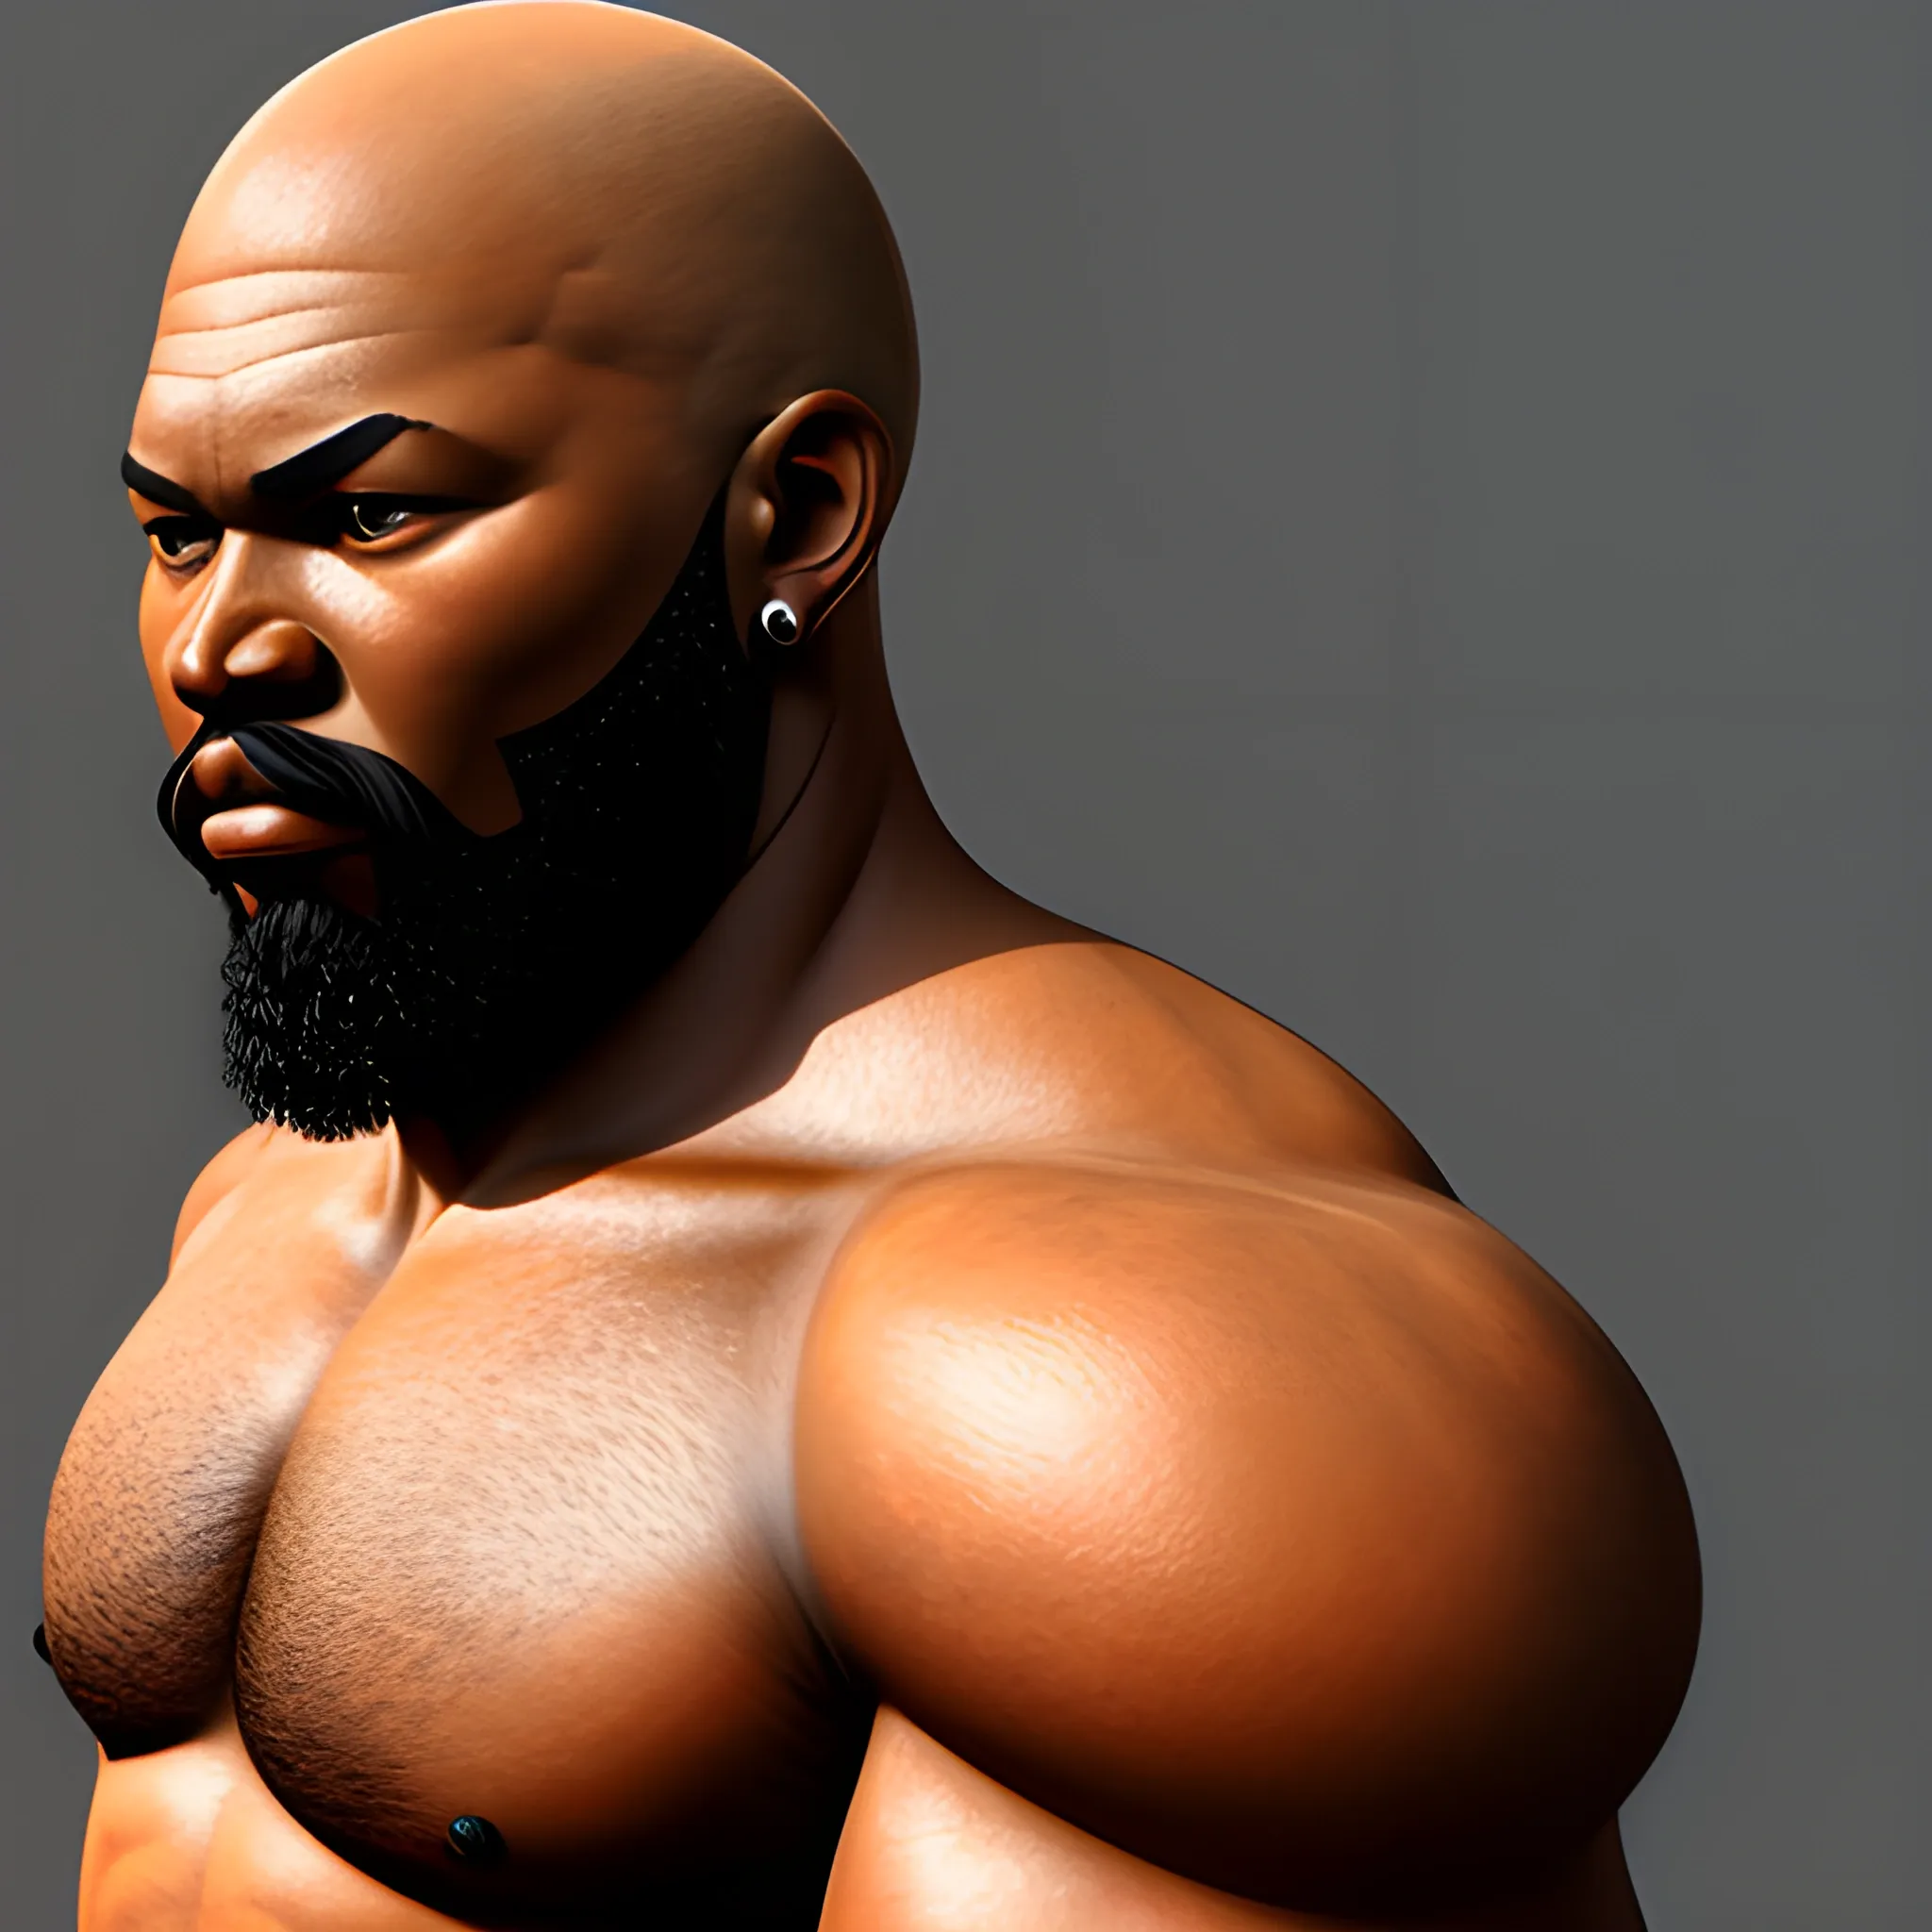 big muscular african warrior king bald head with beard and earrings, 3D